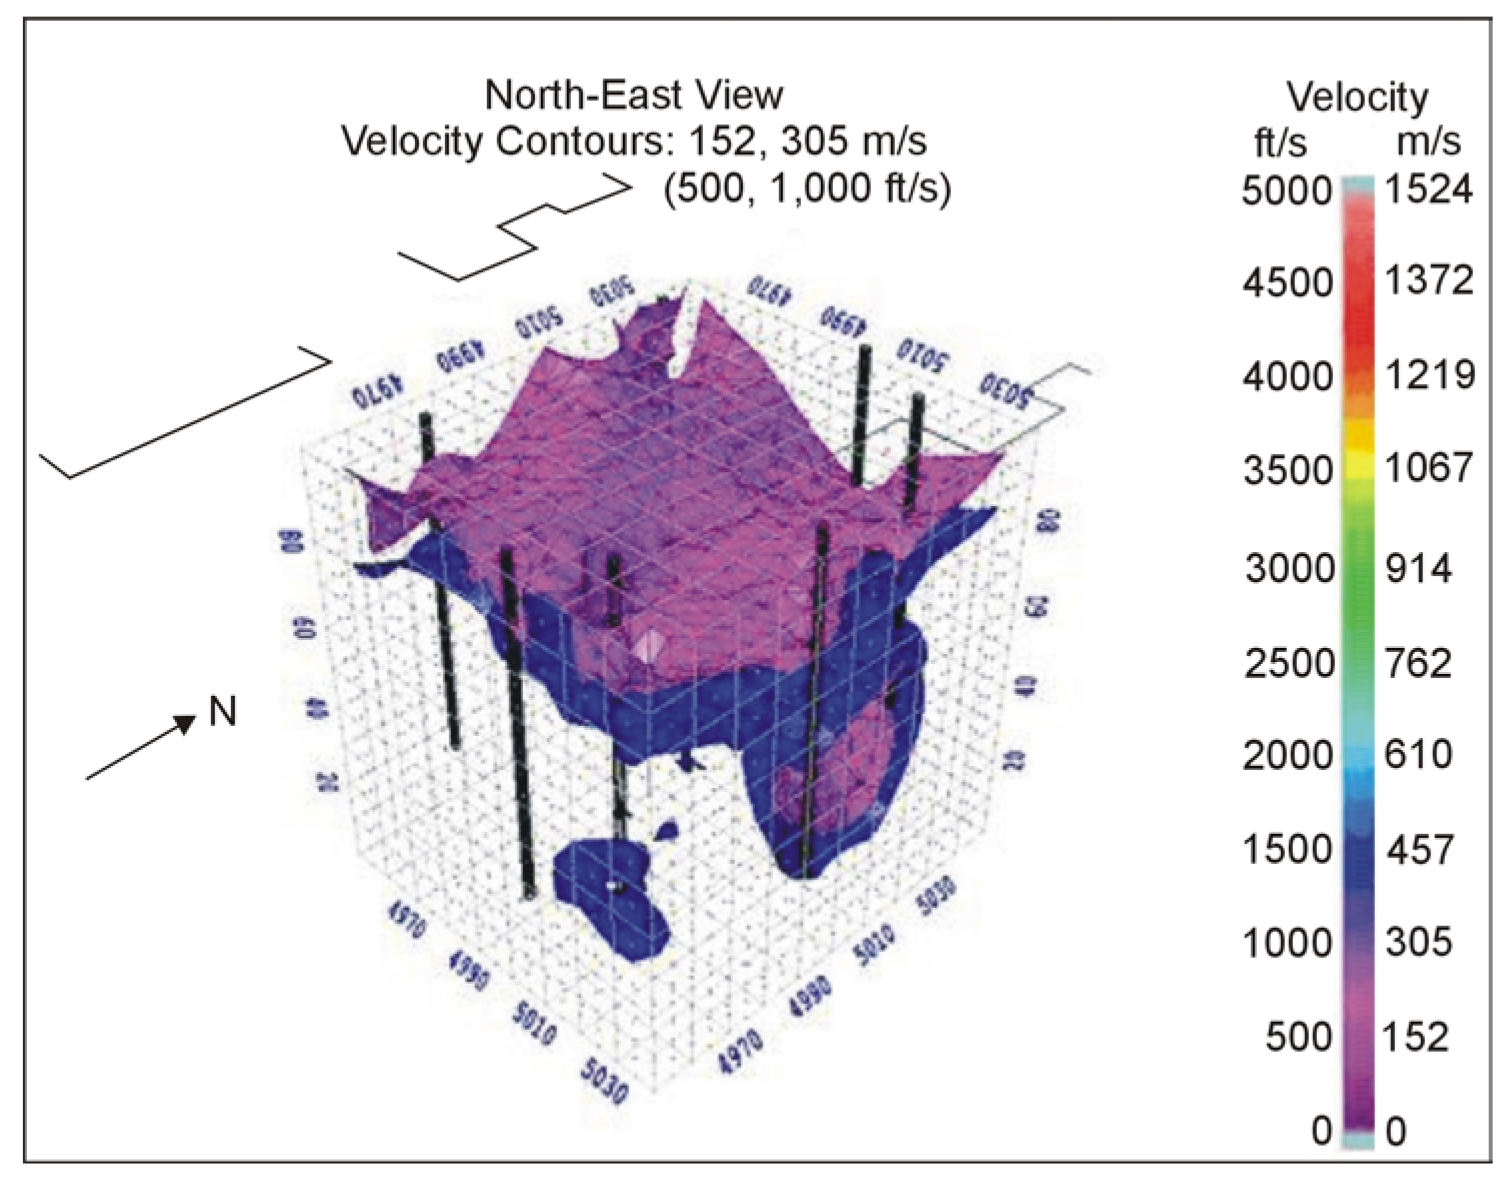 Isometric view of the low velocity zone.  (NSA Geotechnical Services, Inc.)